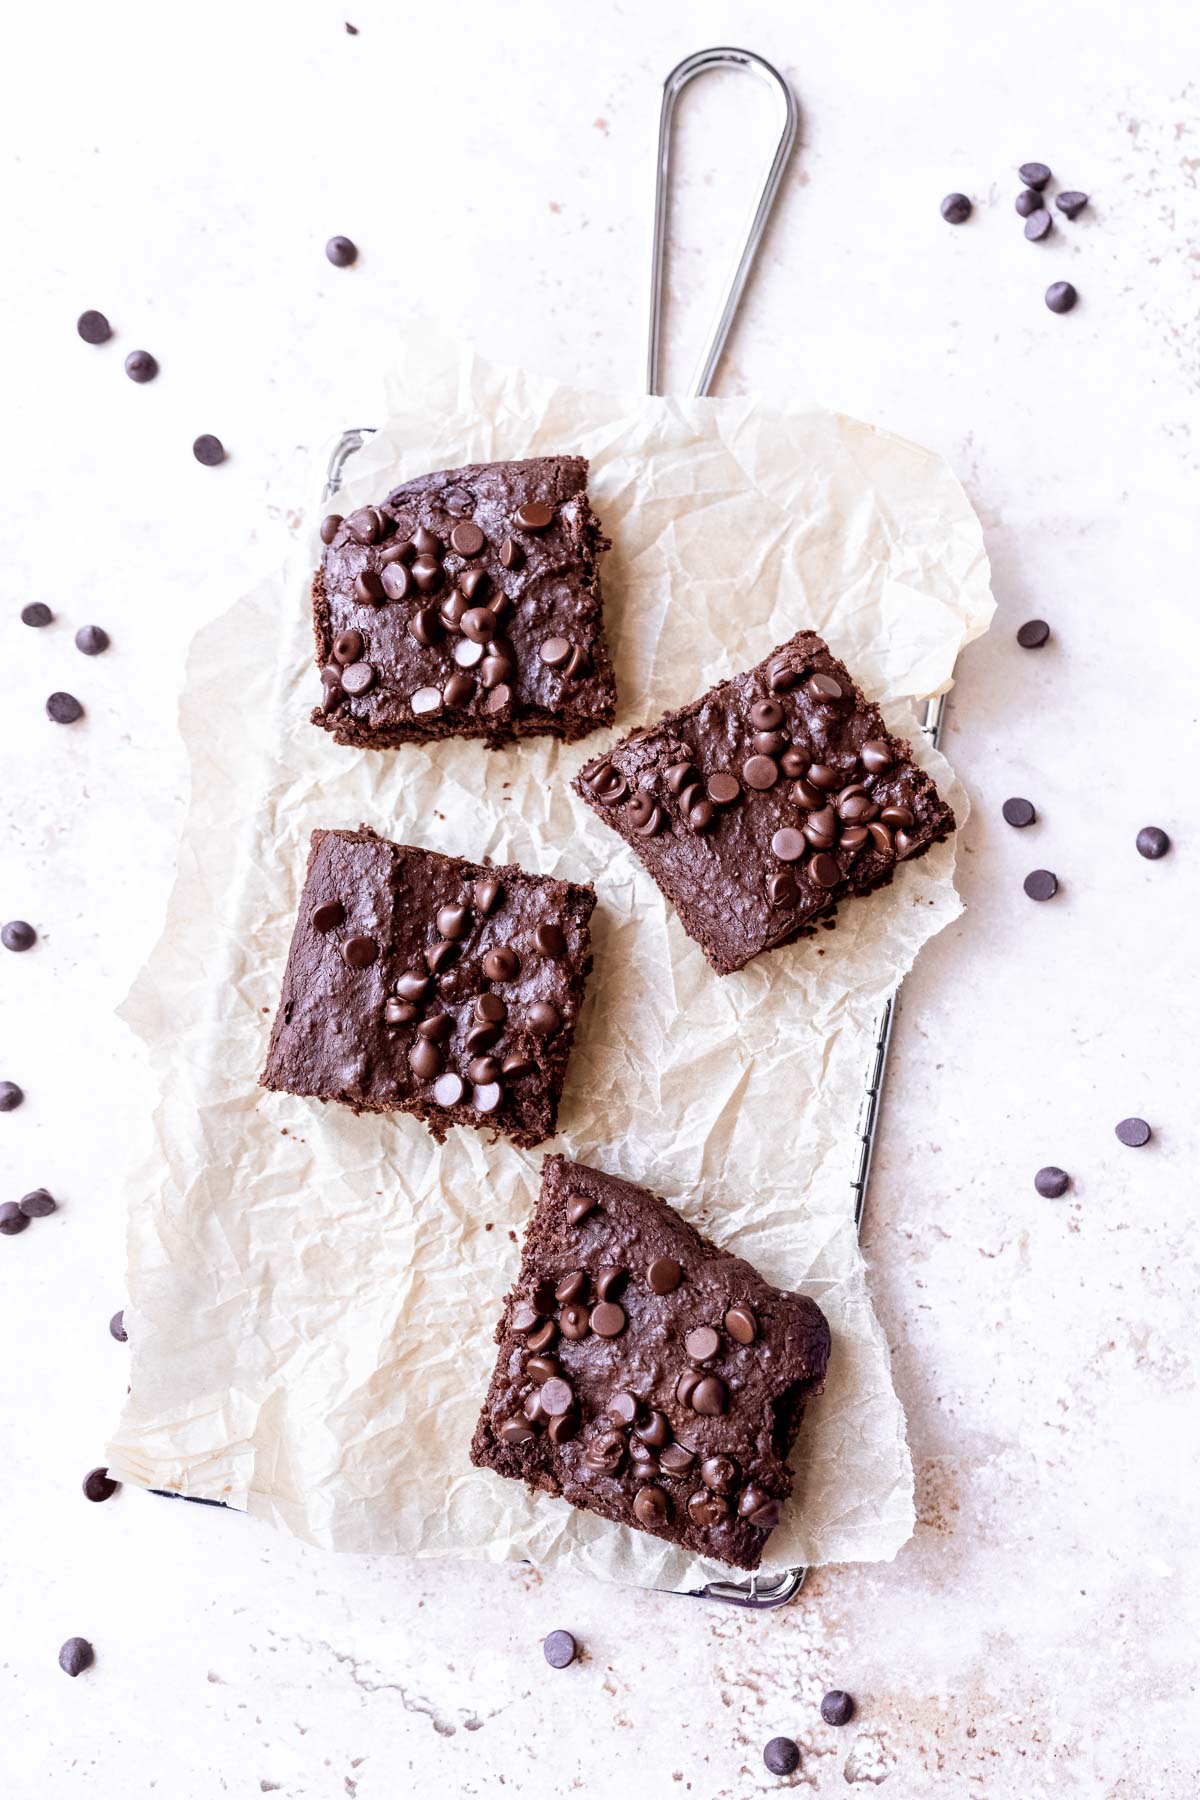 fudgy black bean brownies resting on crumpled parchment paper sprinkled with chocolate chips.